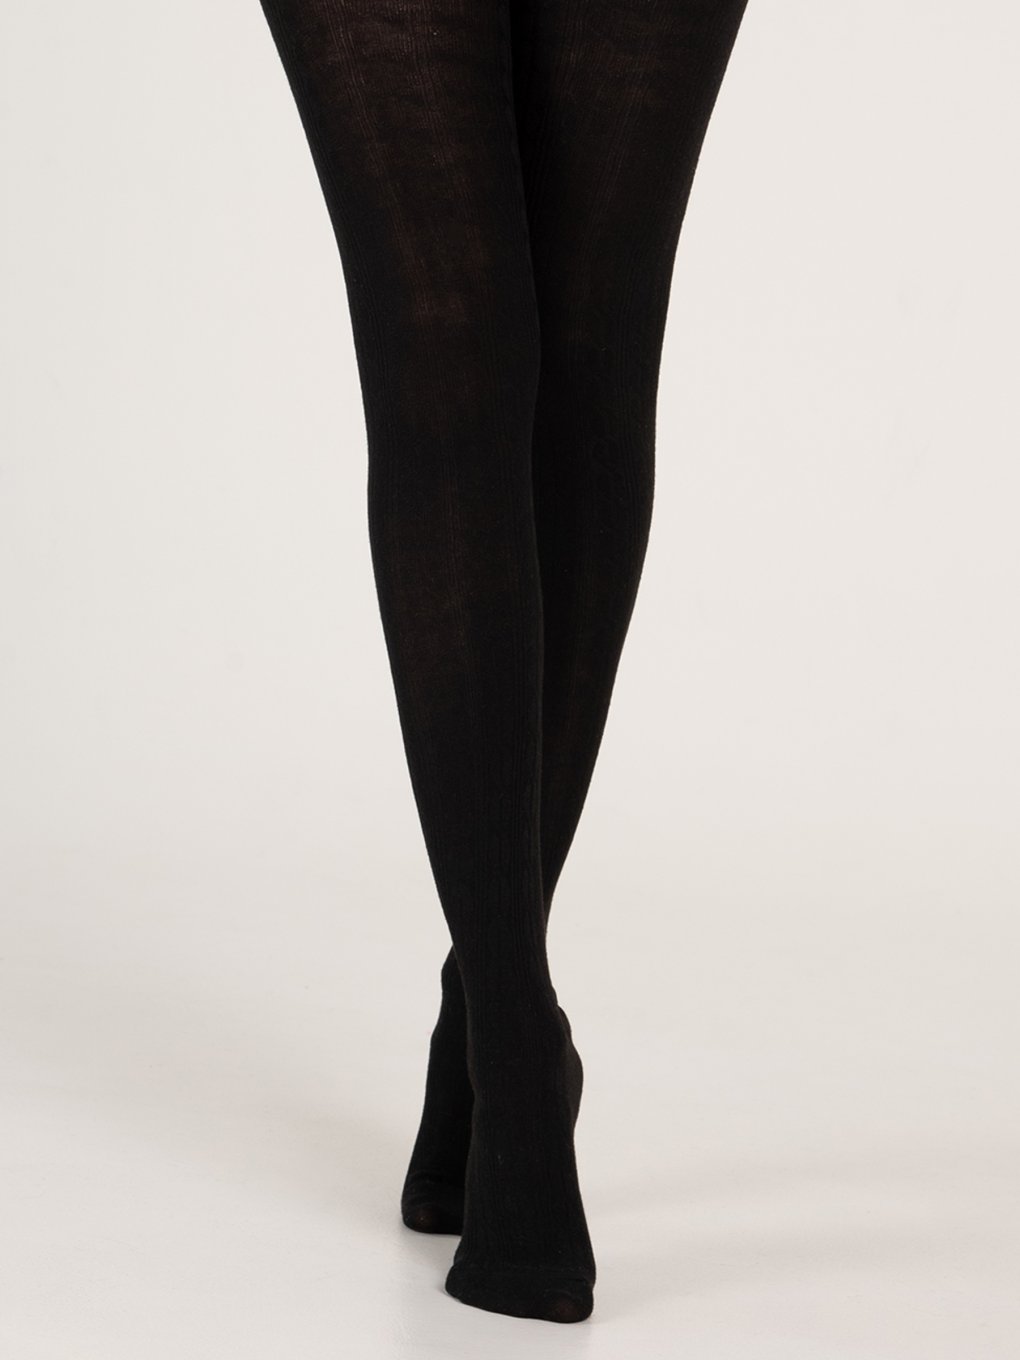 Structured tights